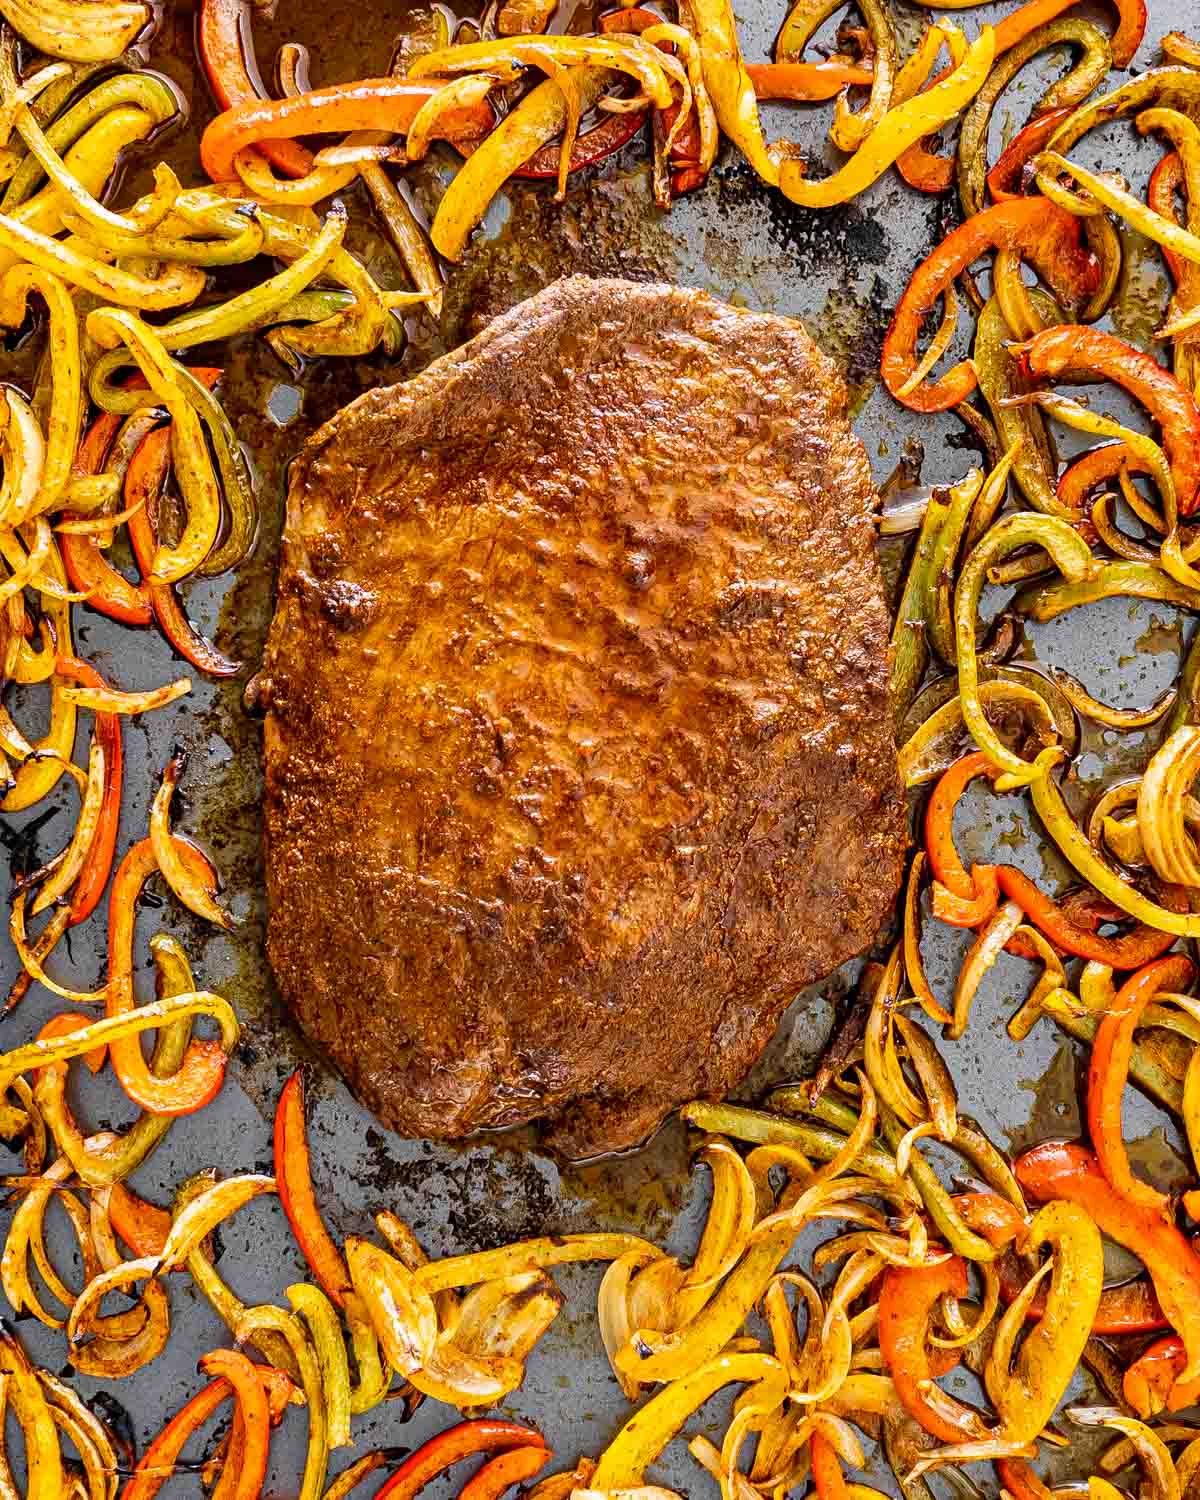 steak fajitas on a sheet pan fresh out of the oven.